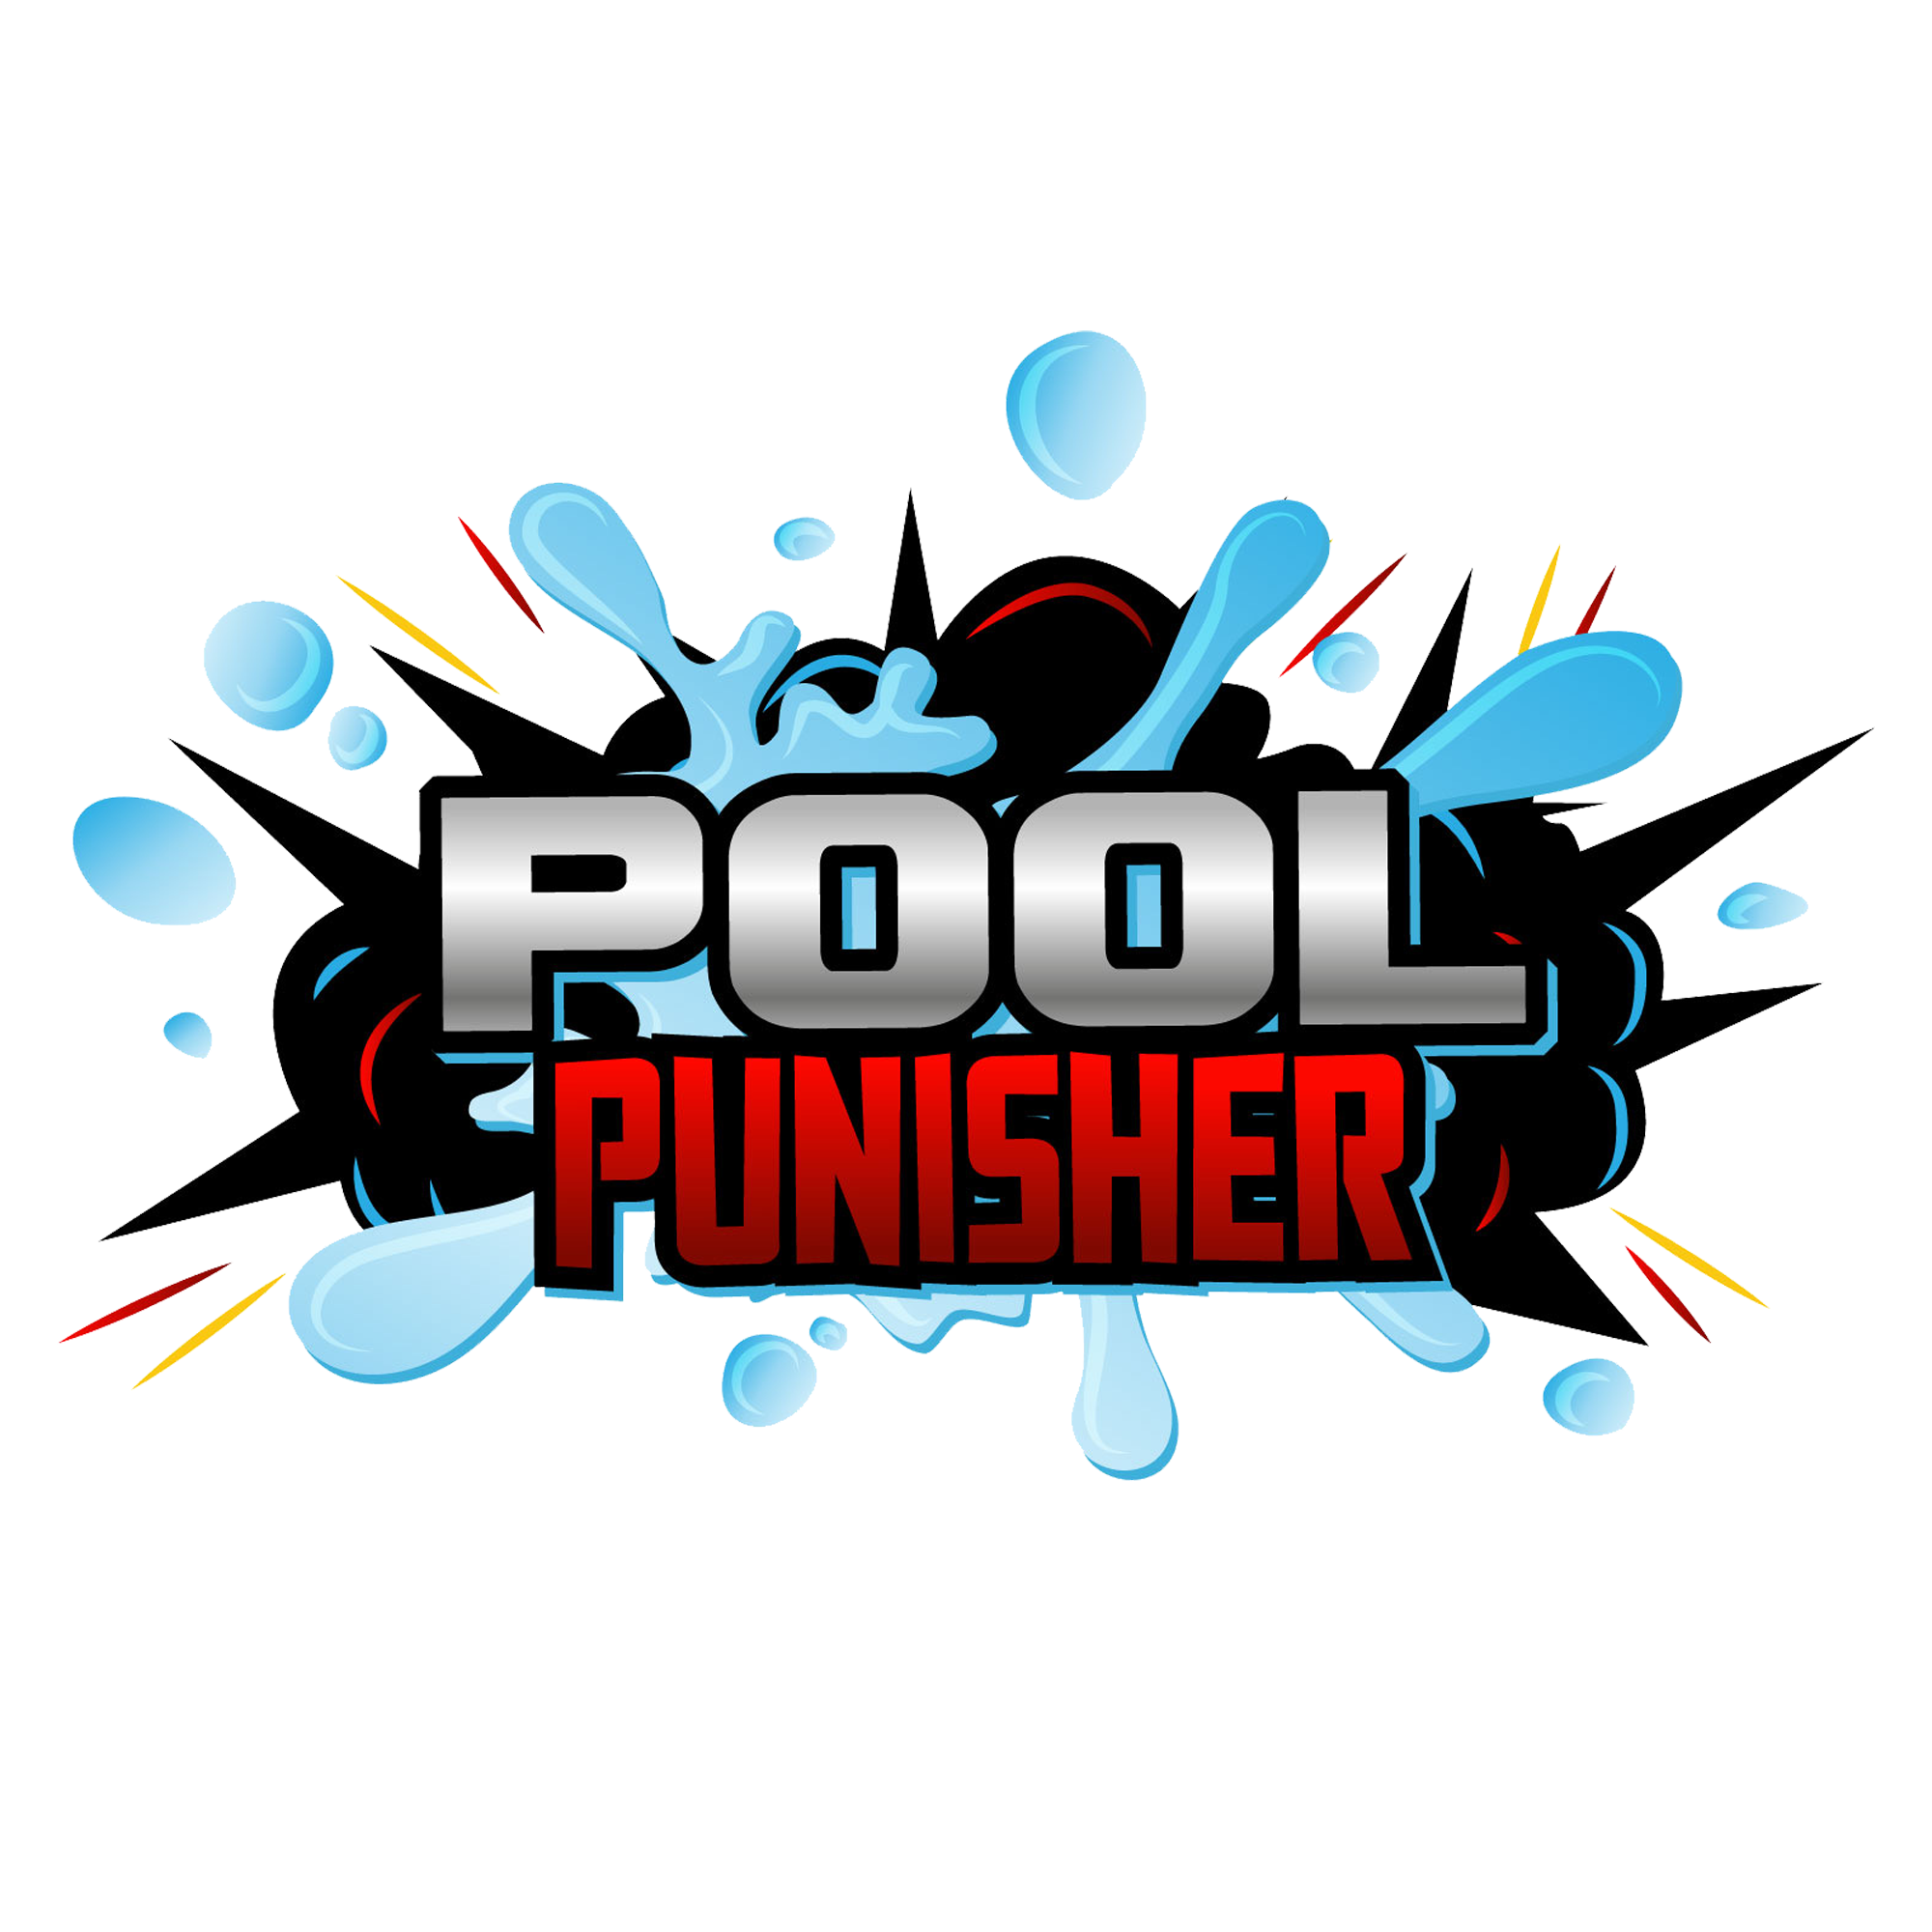 No Other Pool Toy Stand A Chance - Pool Punisher